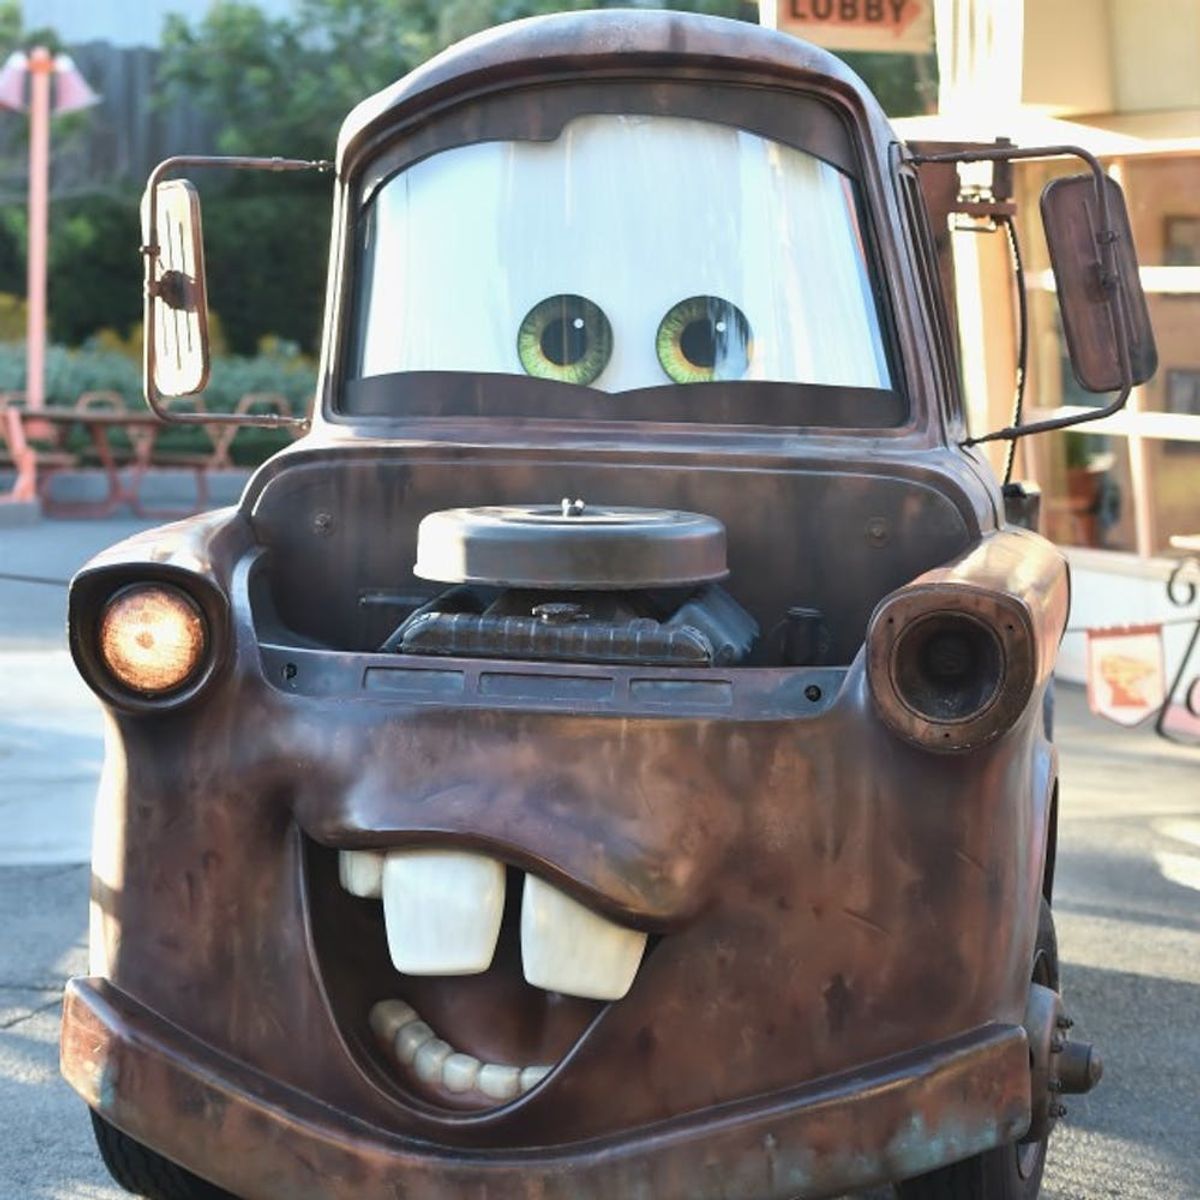 This Pixar Theory Is Gaining New Ground Since the Release of Cars 3